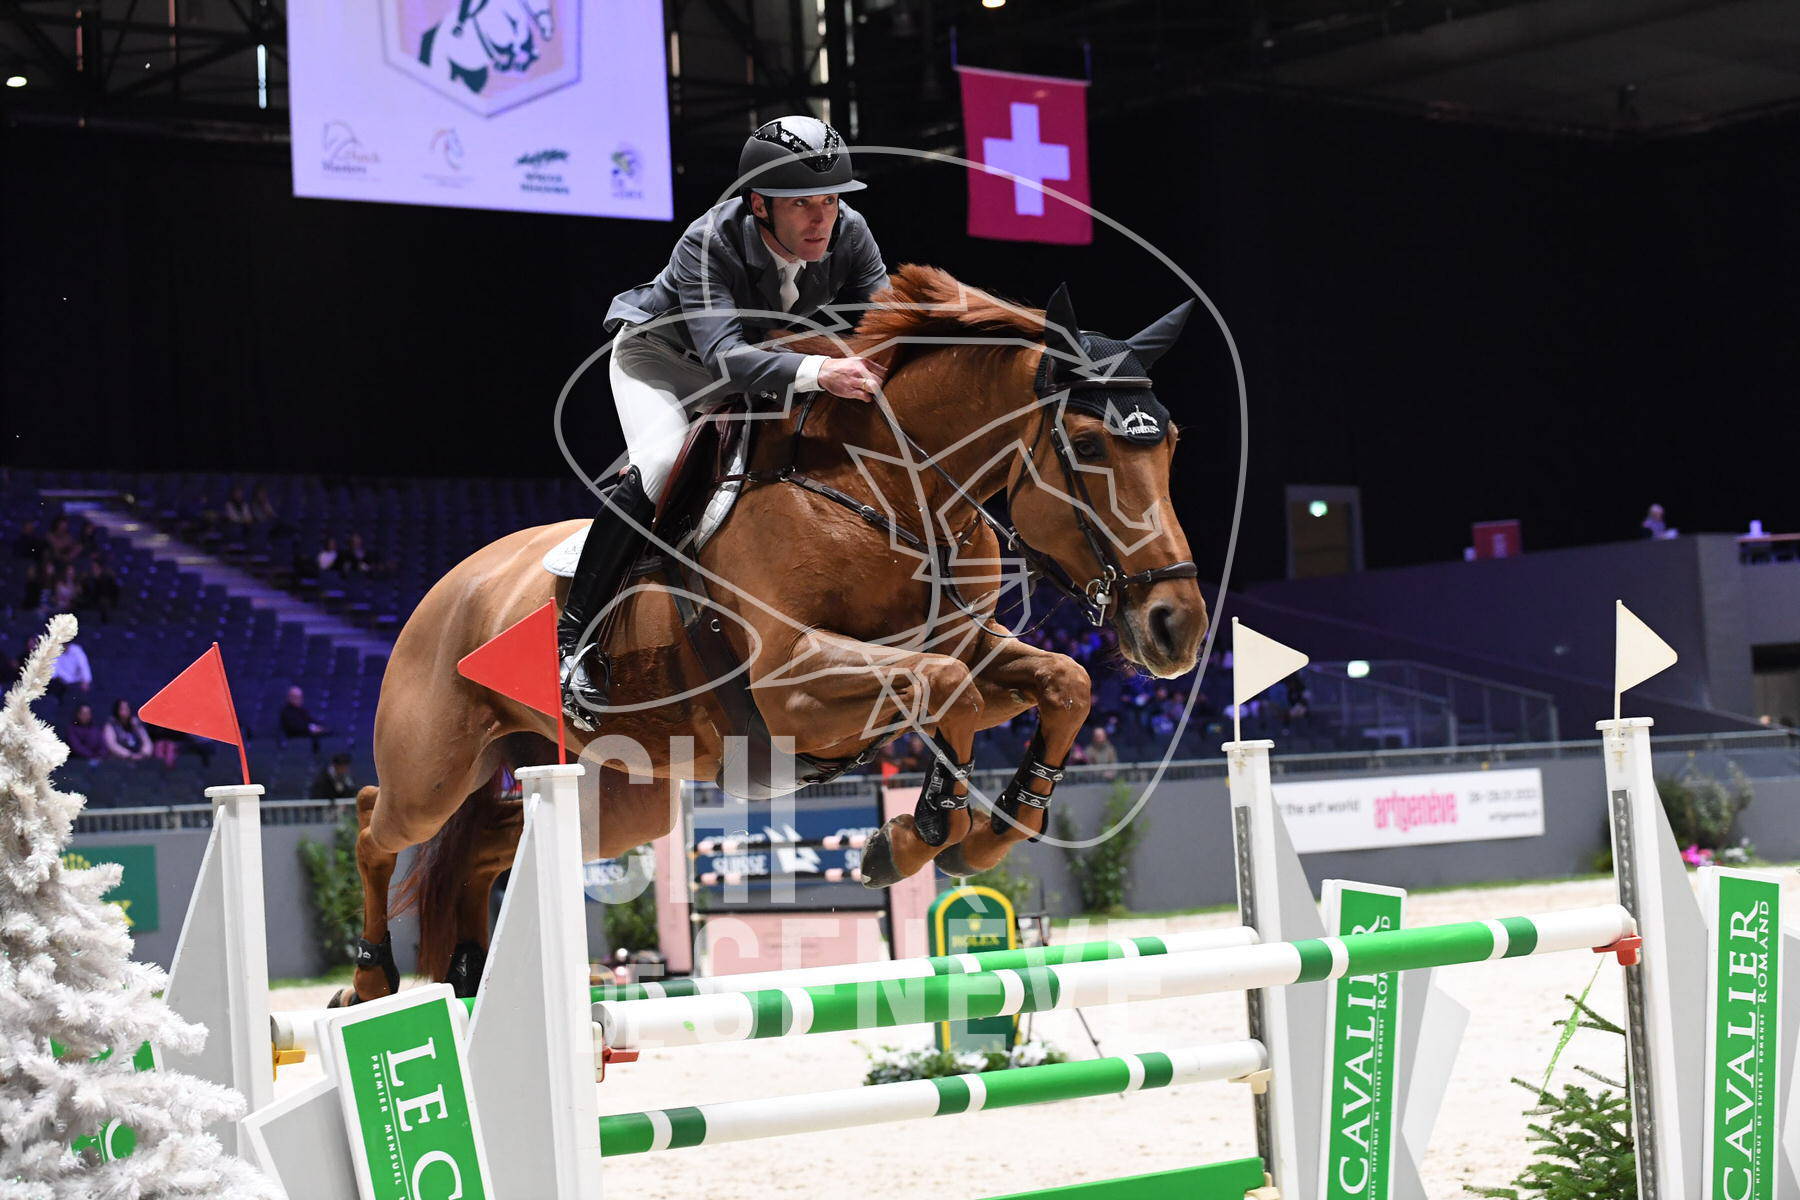 rolex grand slam of show jumping